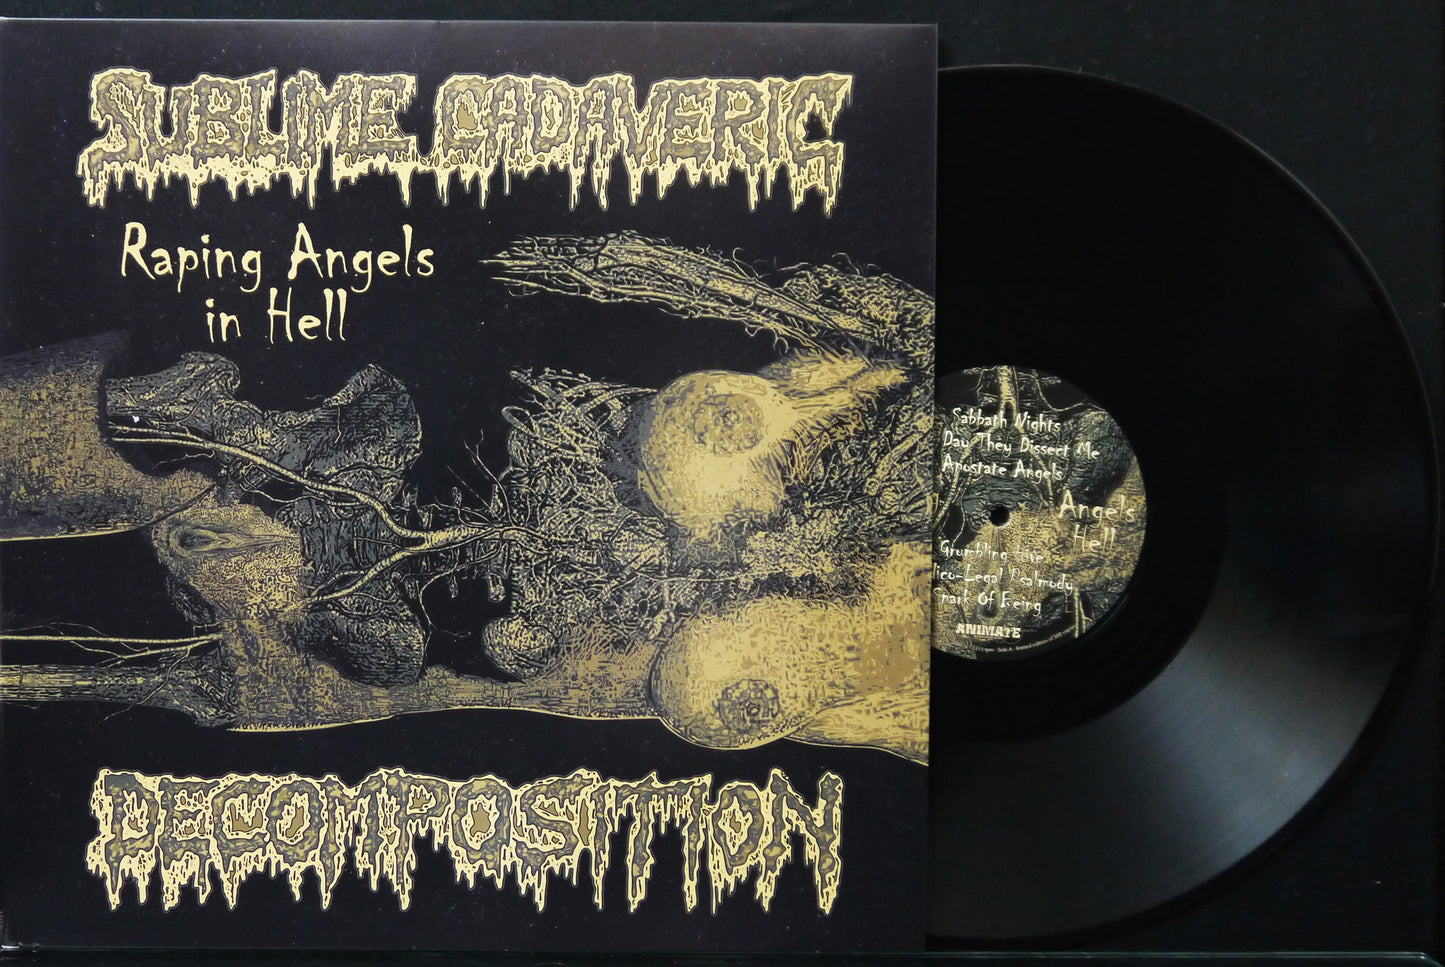 SUBLIME CADAVERIC DECOMPOSITION - Raping Angels In Hell 12"